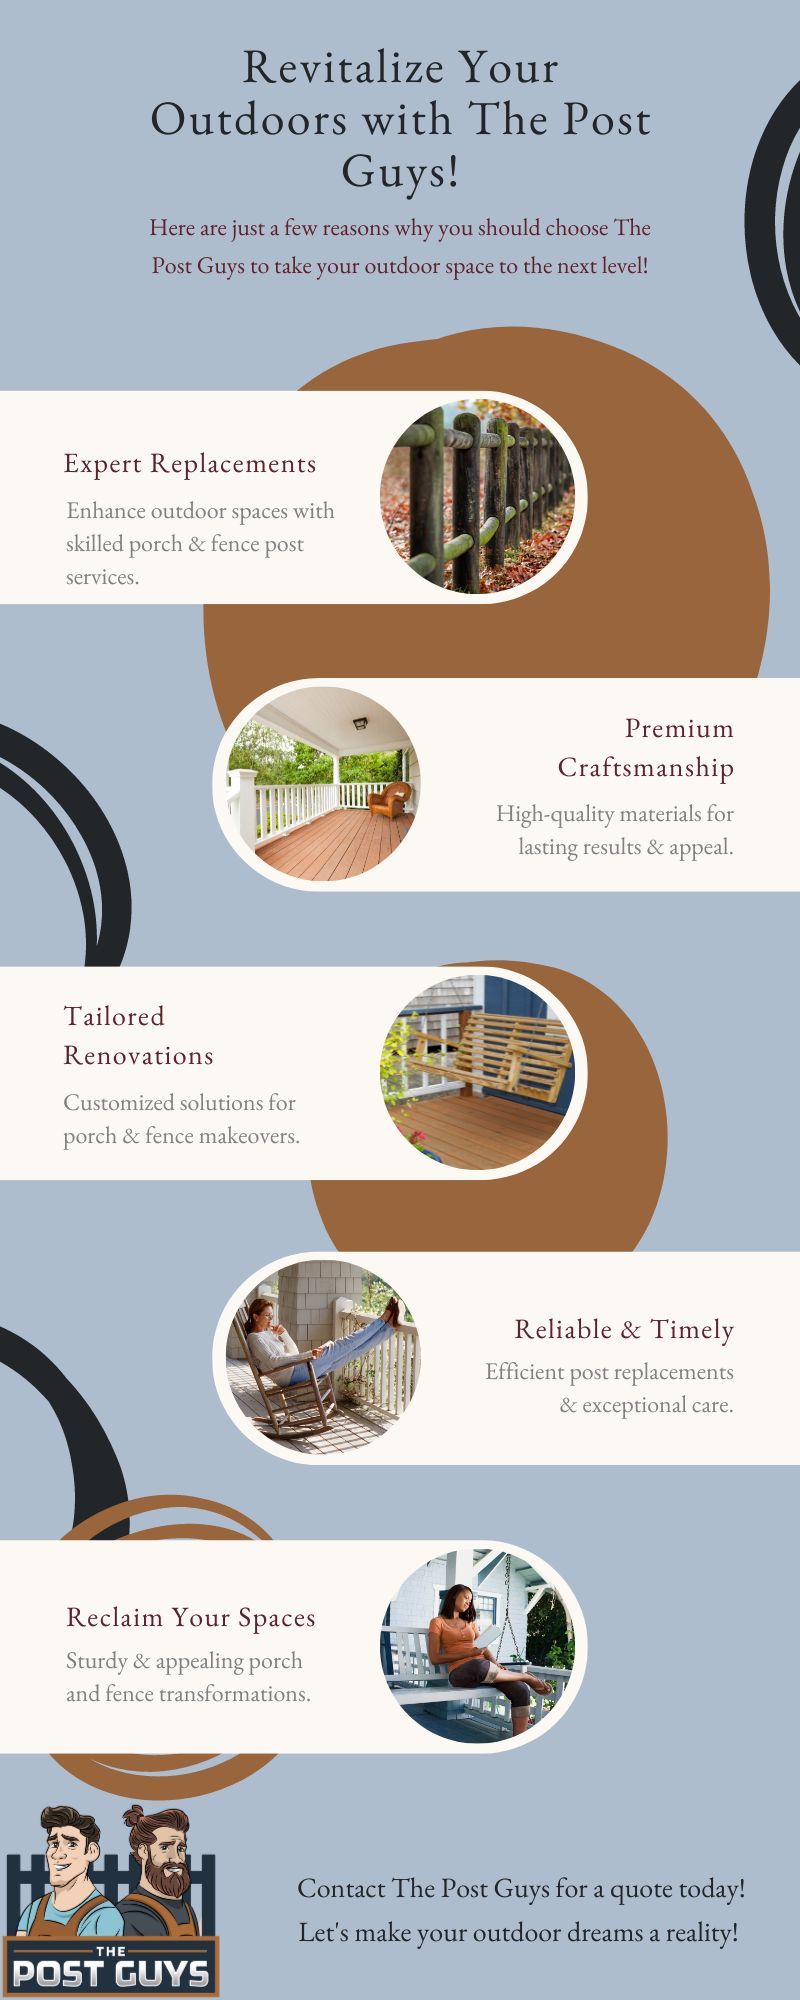 M38606 - Infographic - Revitalize Your Outdoors with The Post Guys!.jpg